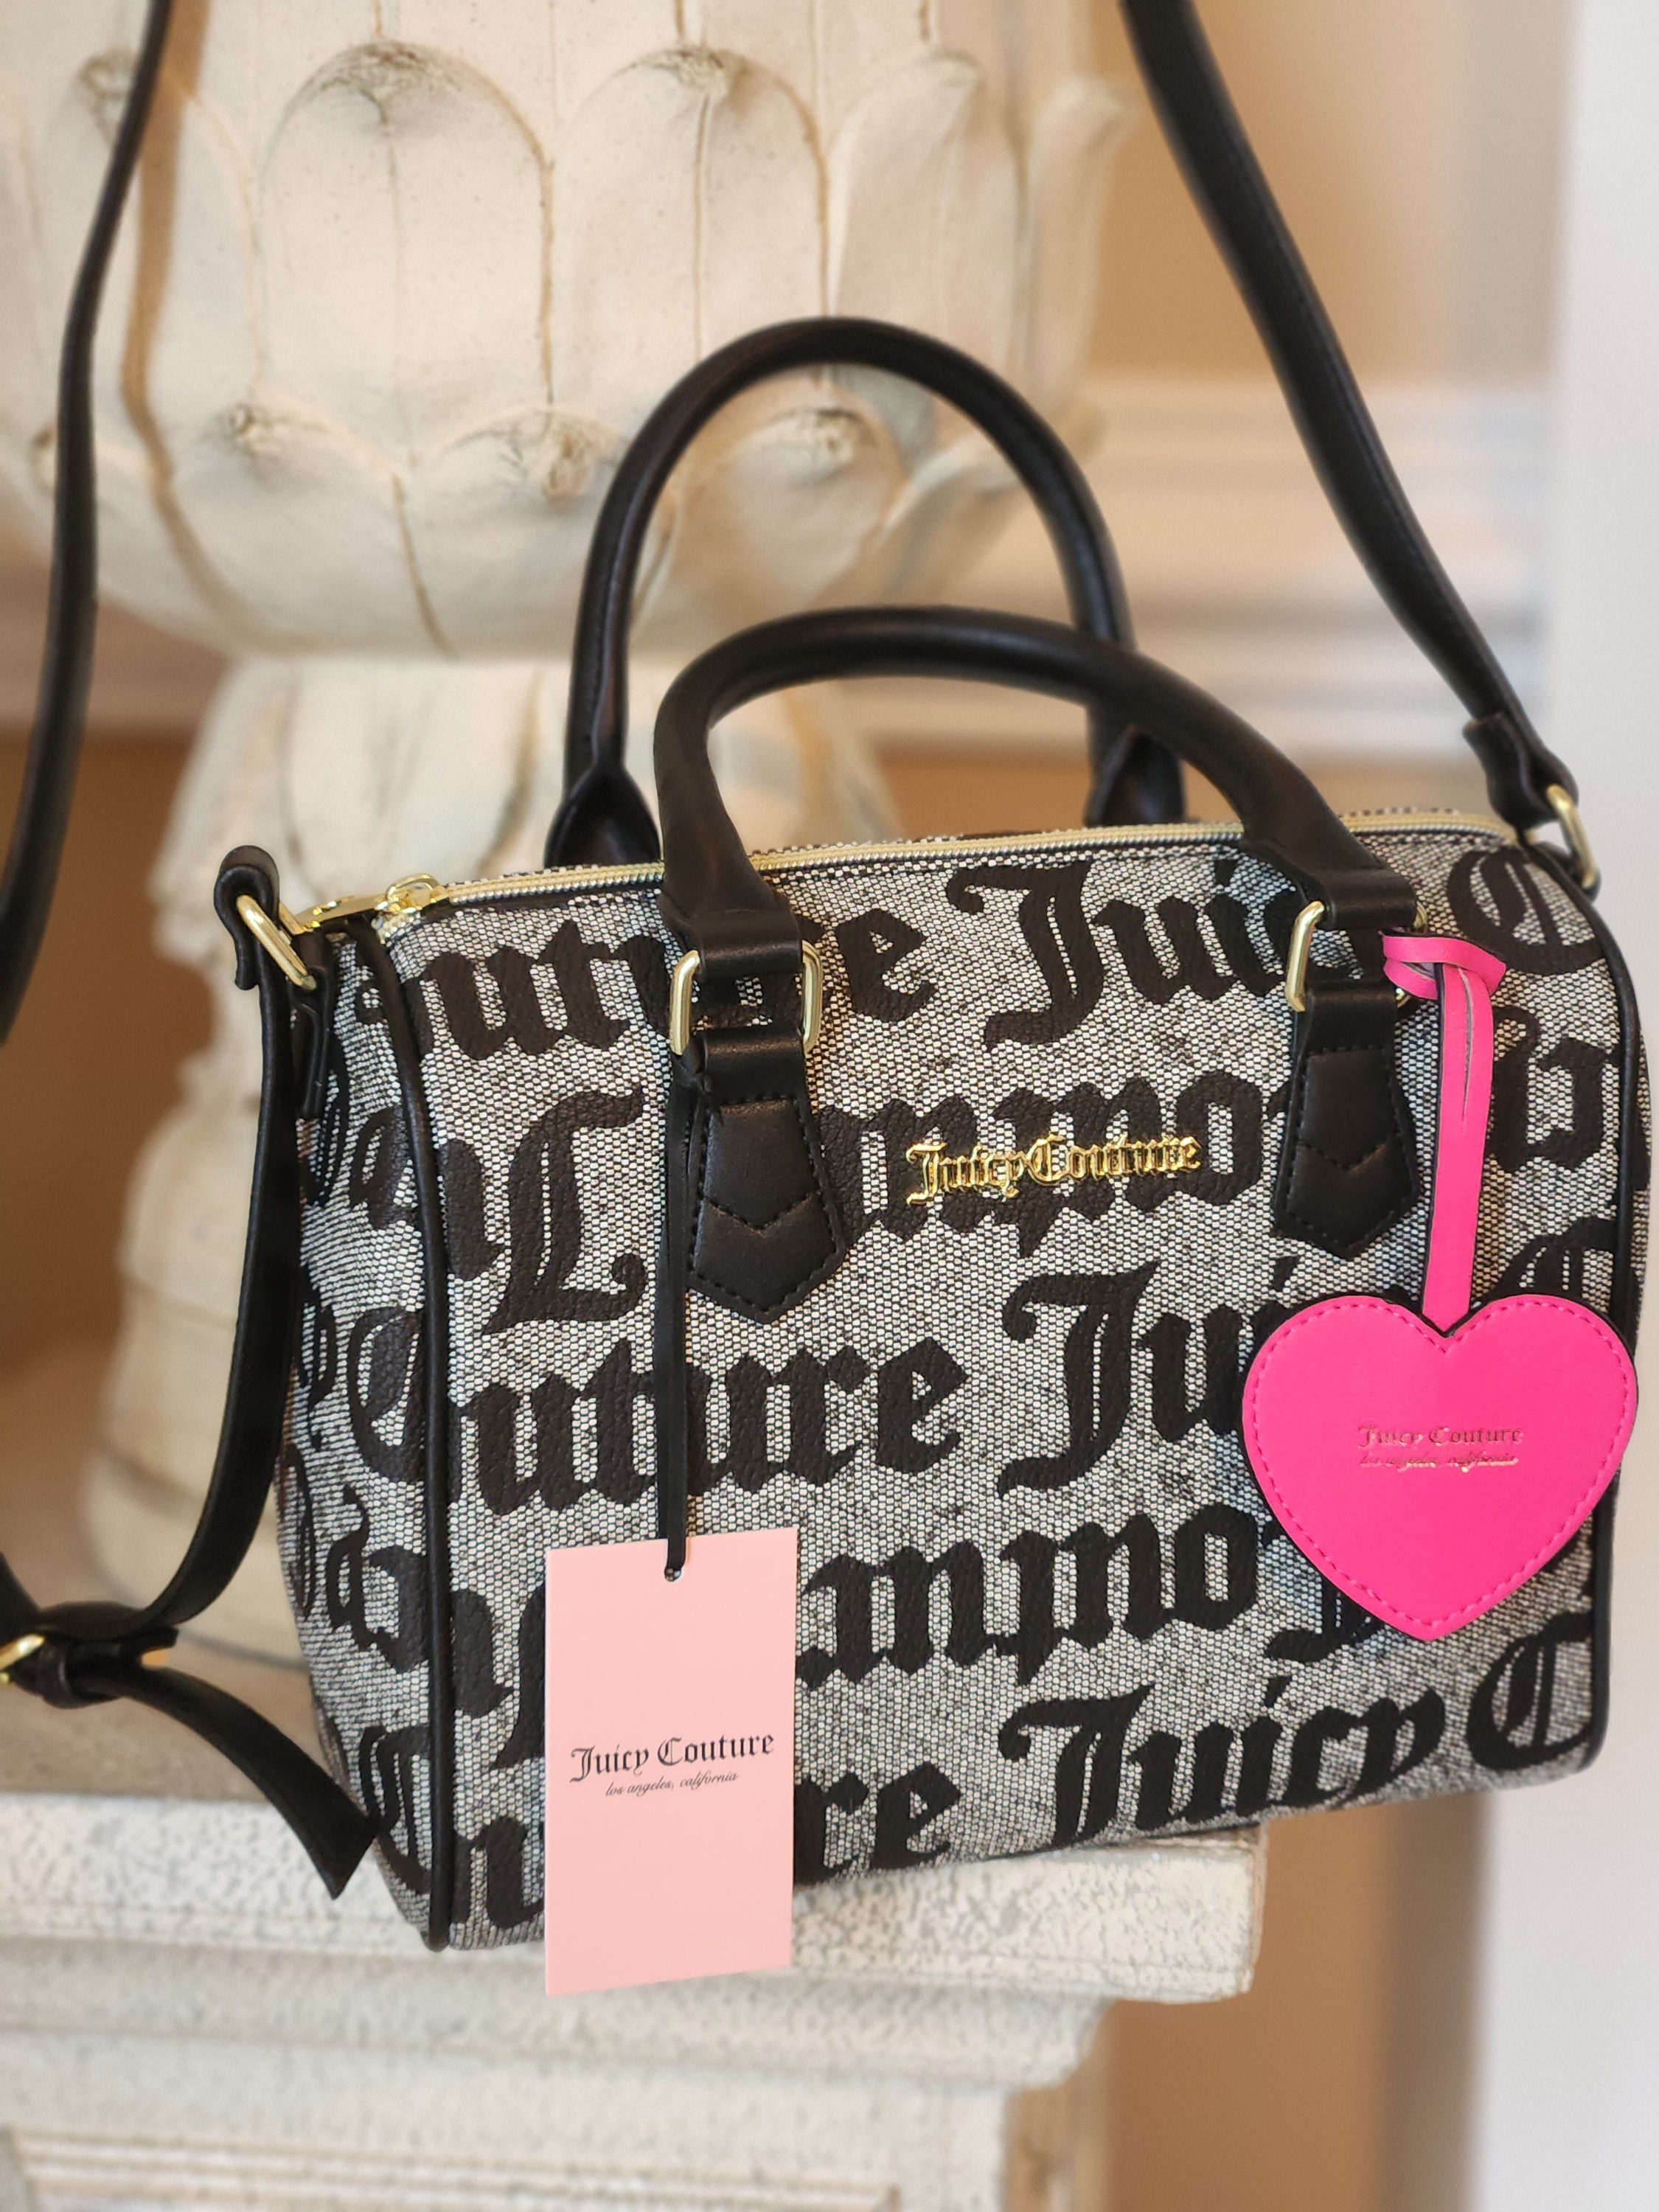 Juicy By Juicy Couture Wordy Satchel - JCPenney